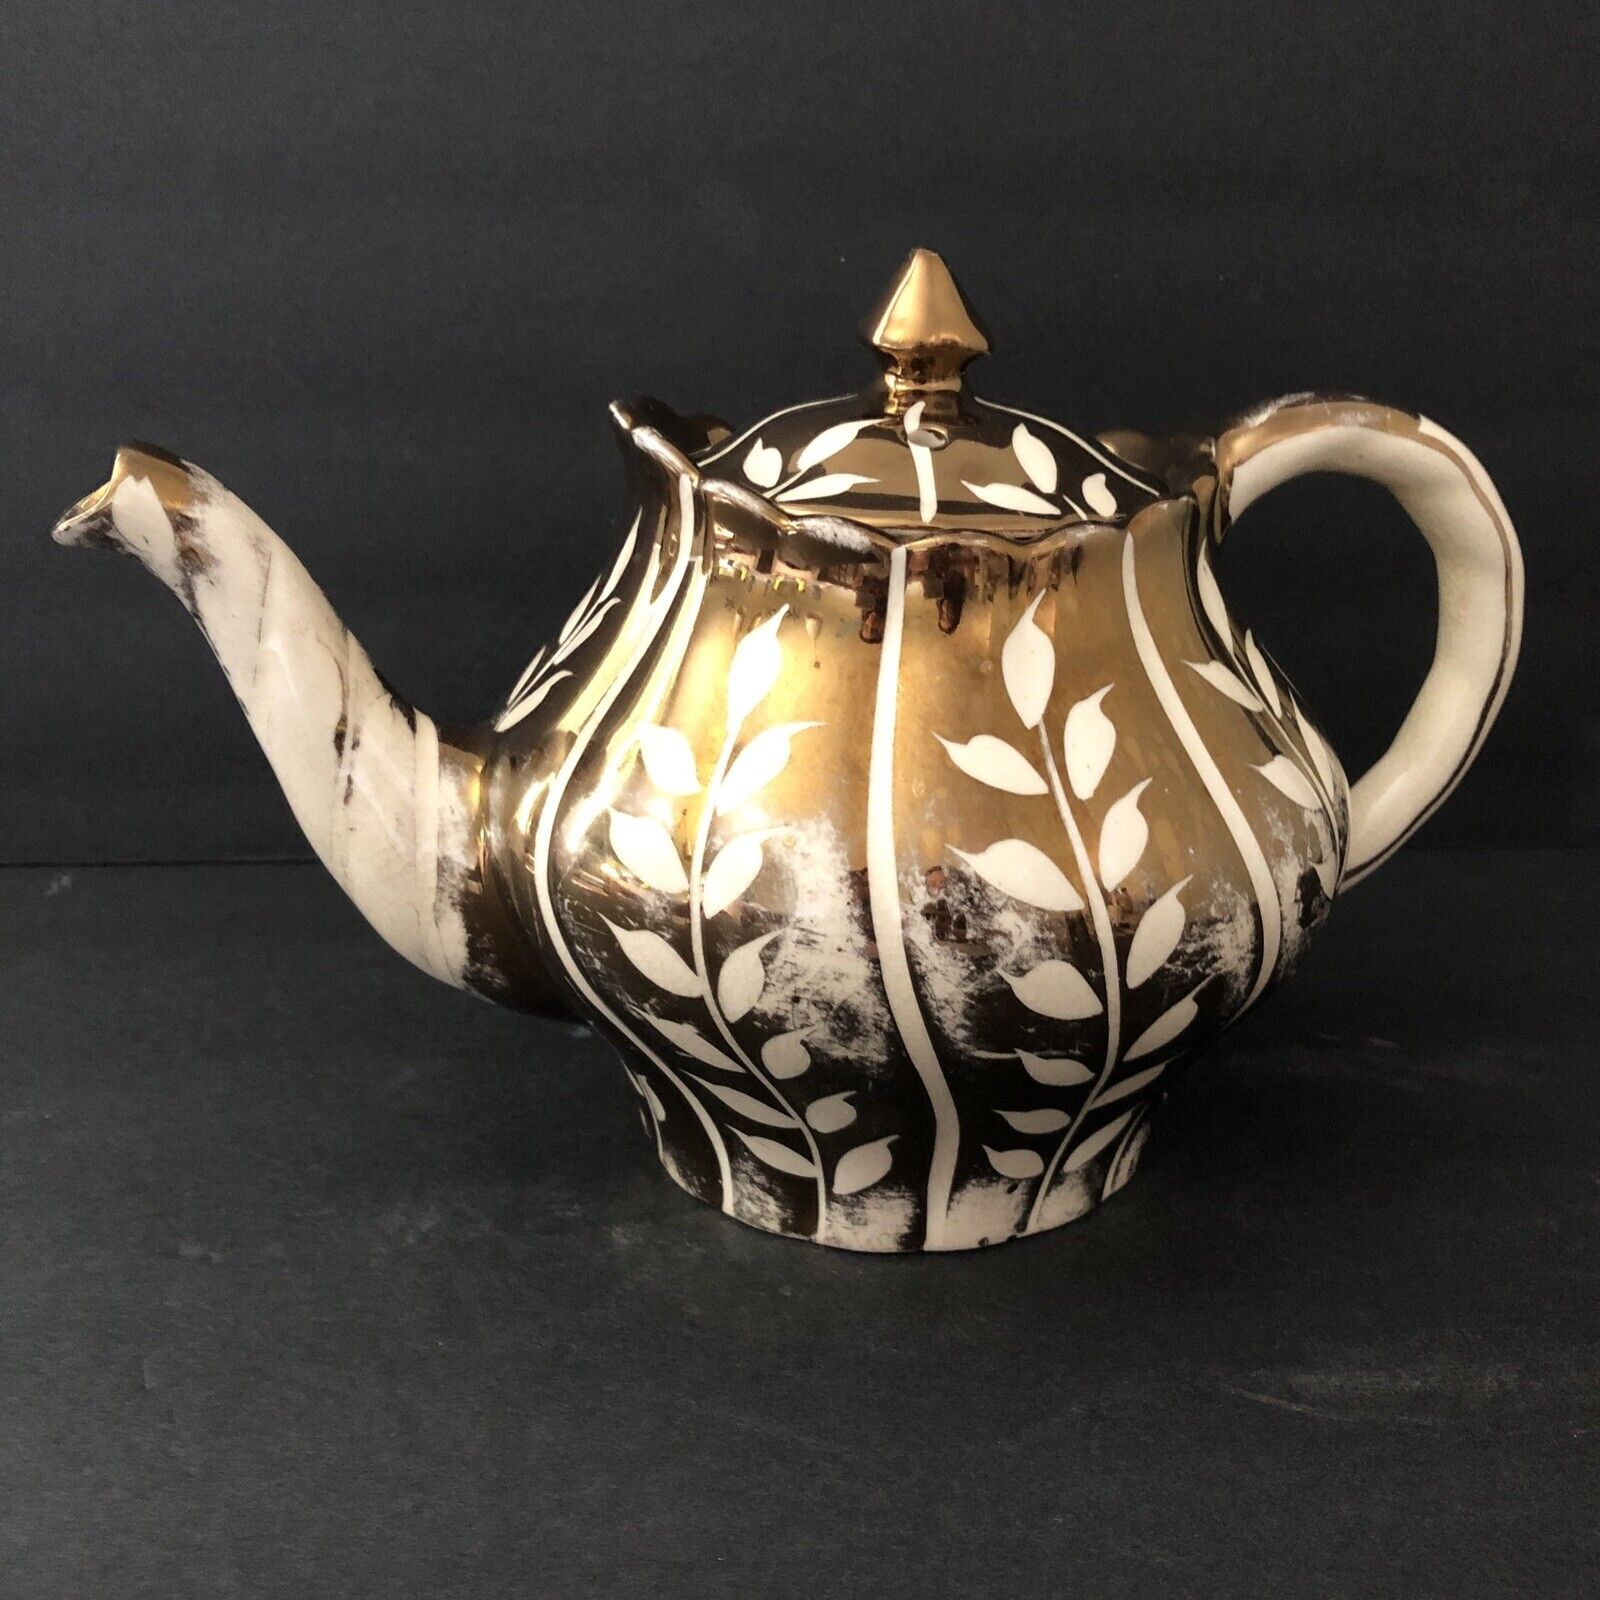 Quality Arthur Wood England Copper Gold Gilded Vines Leaves Teapot